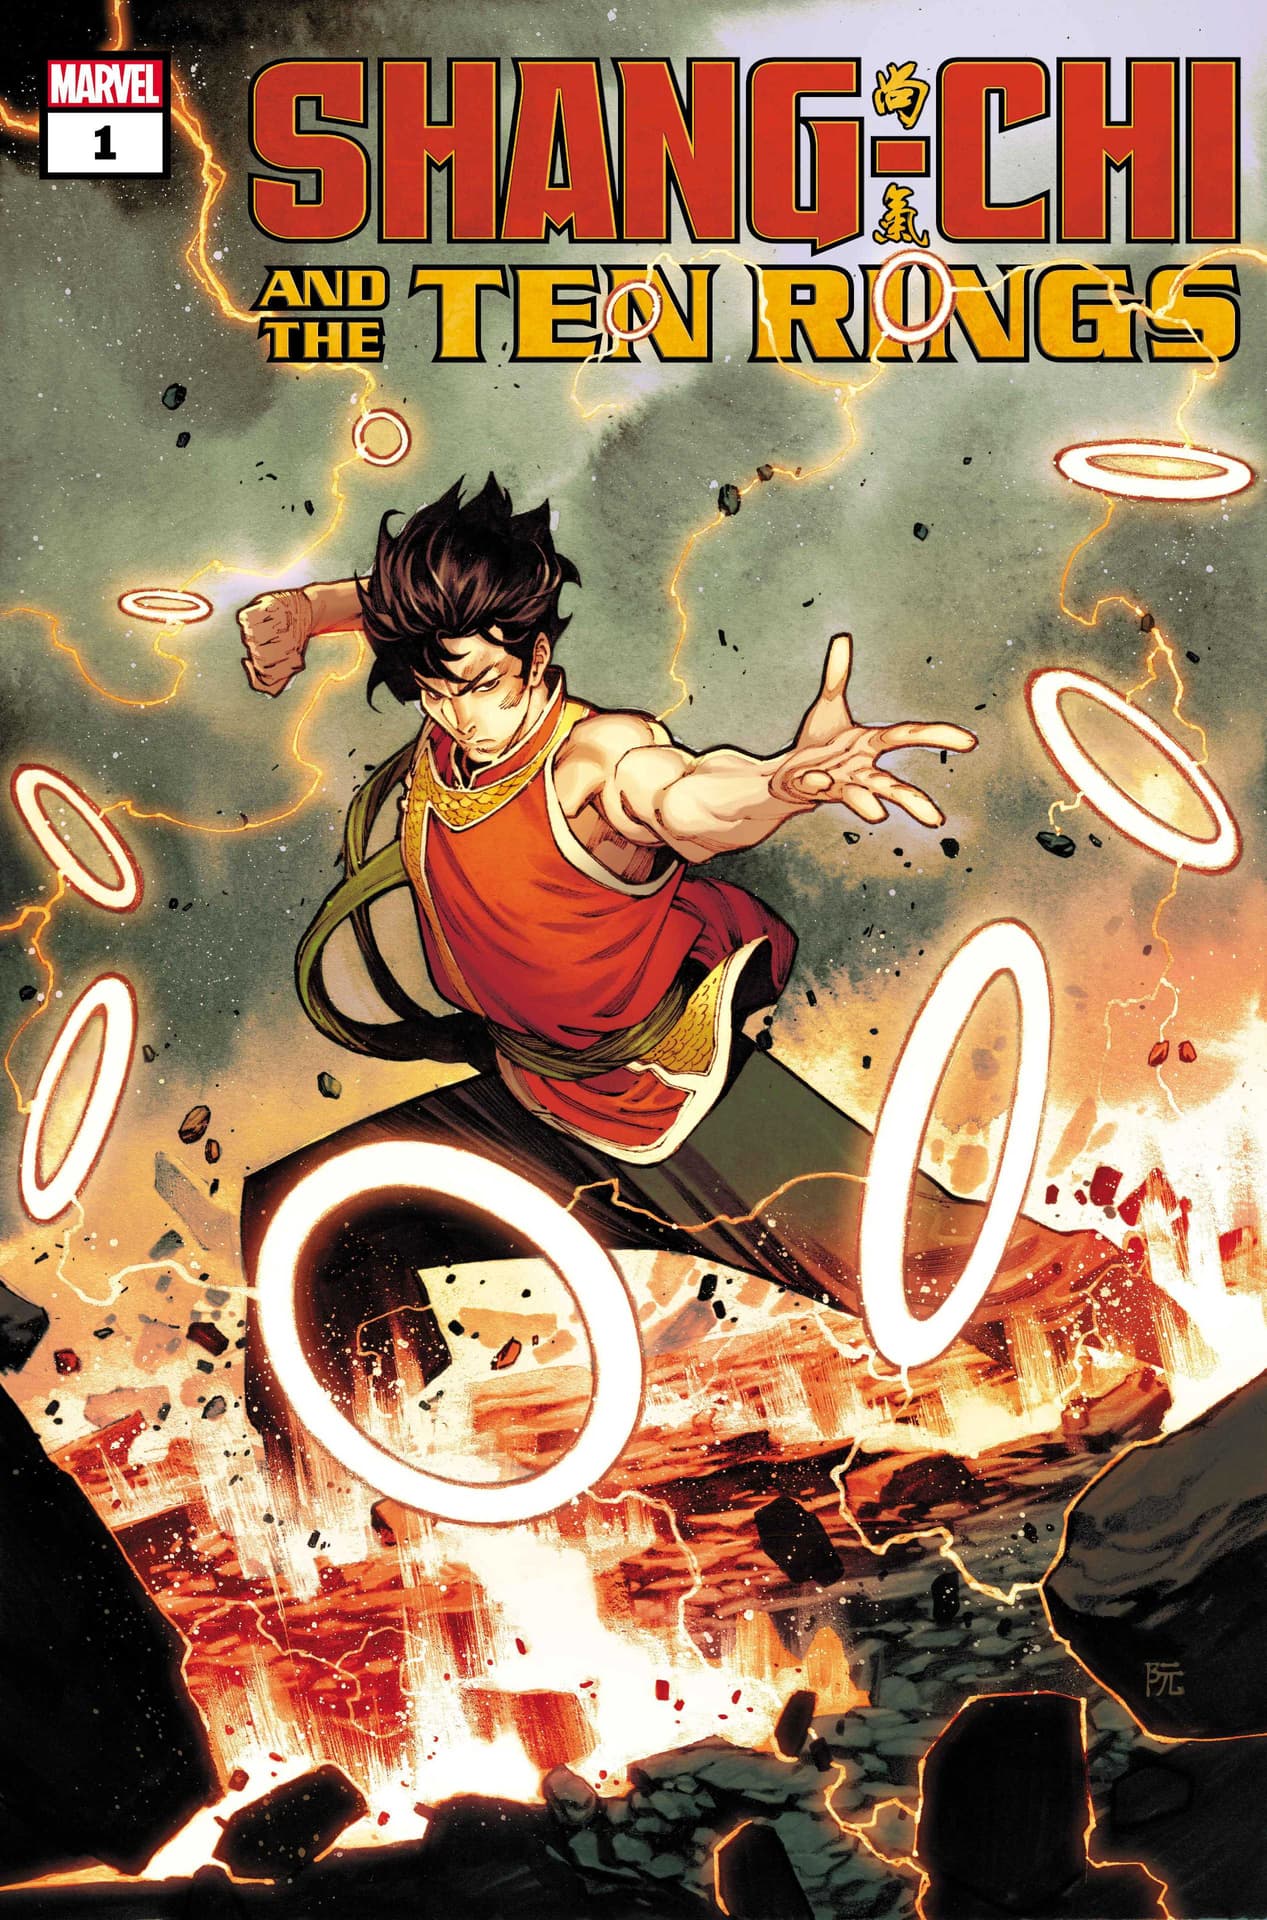 Shang-Chi and the Ten Rings #1 cover by Dike Ruan